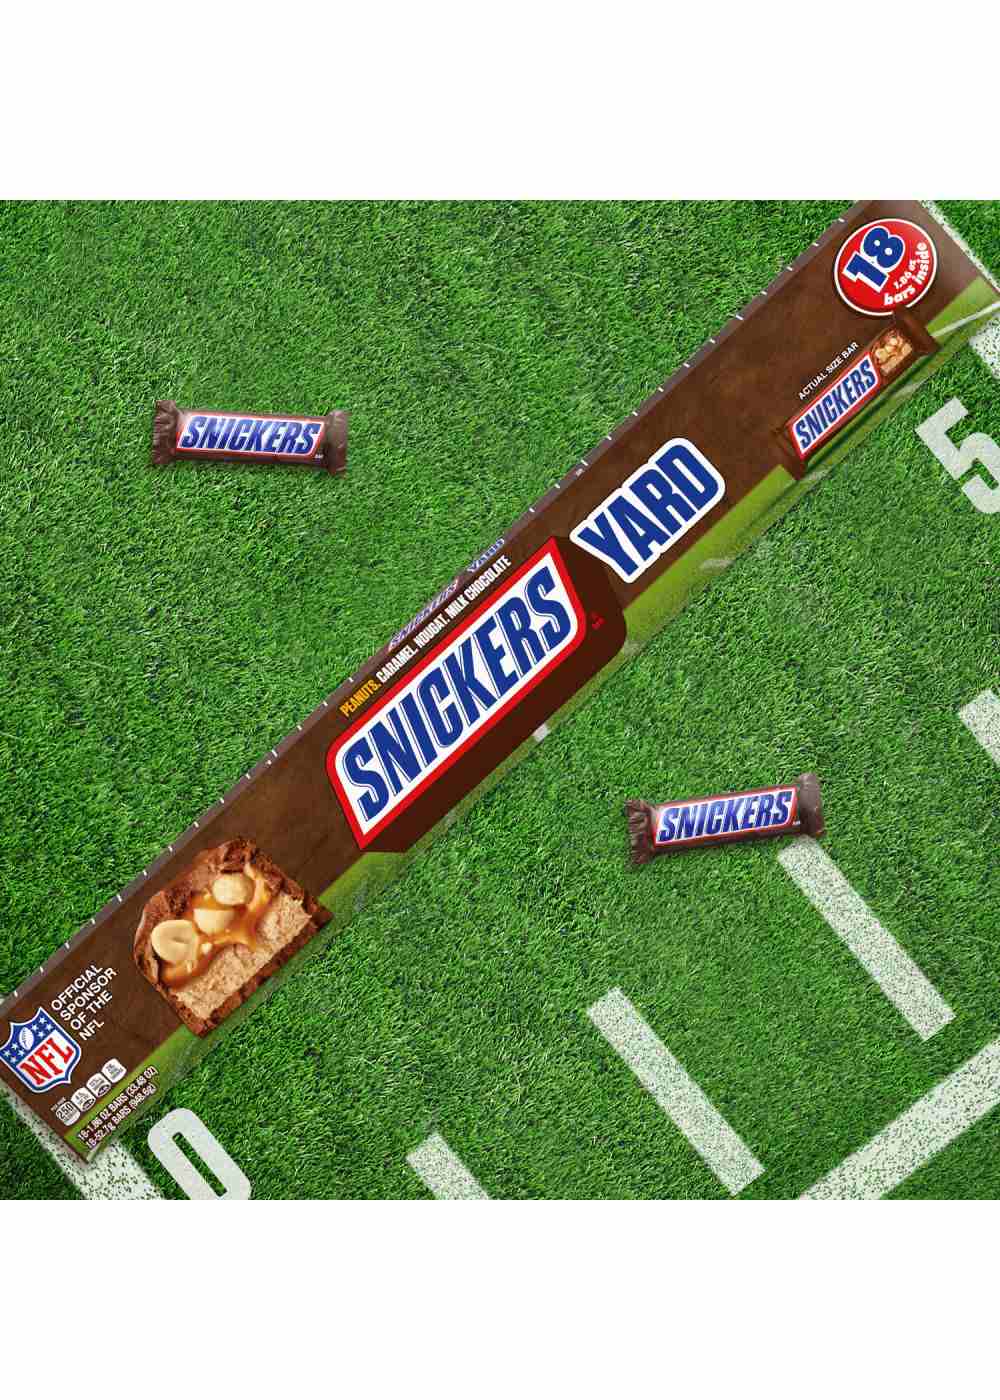 Snickers Yard Full Size Chocolate Candy Bars; image 6 of 7